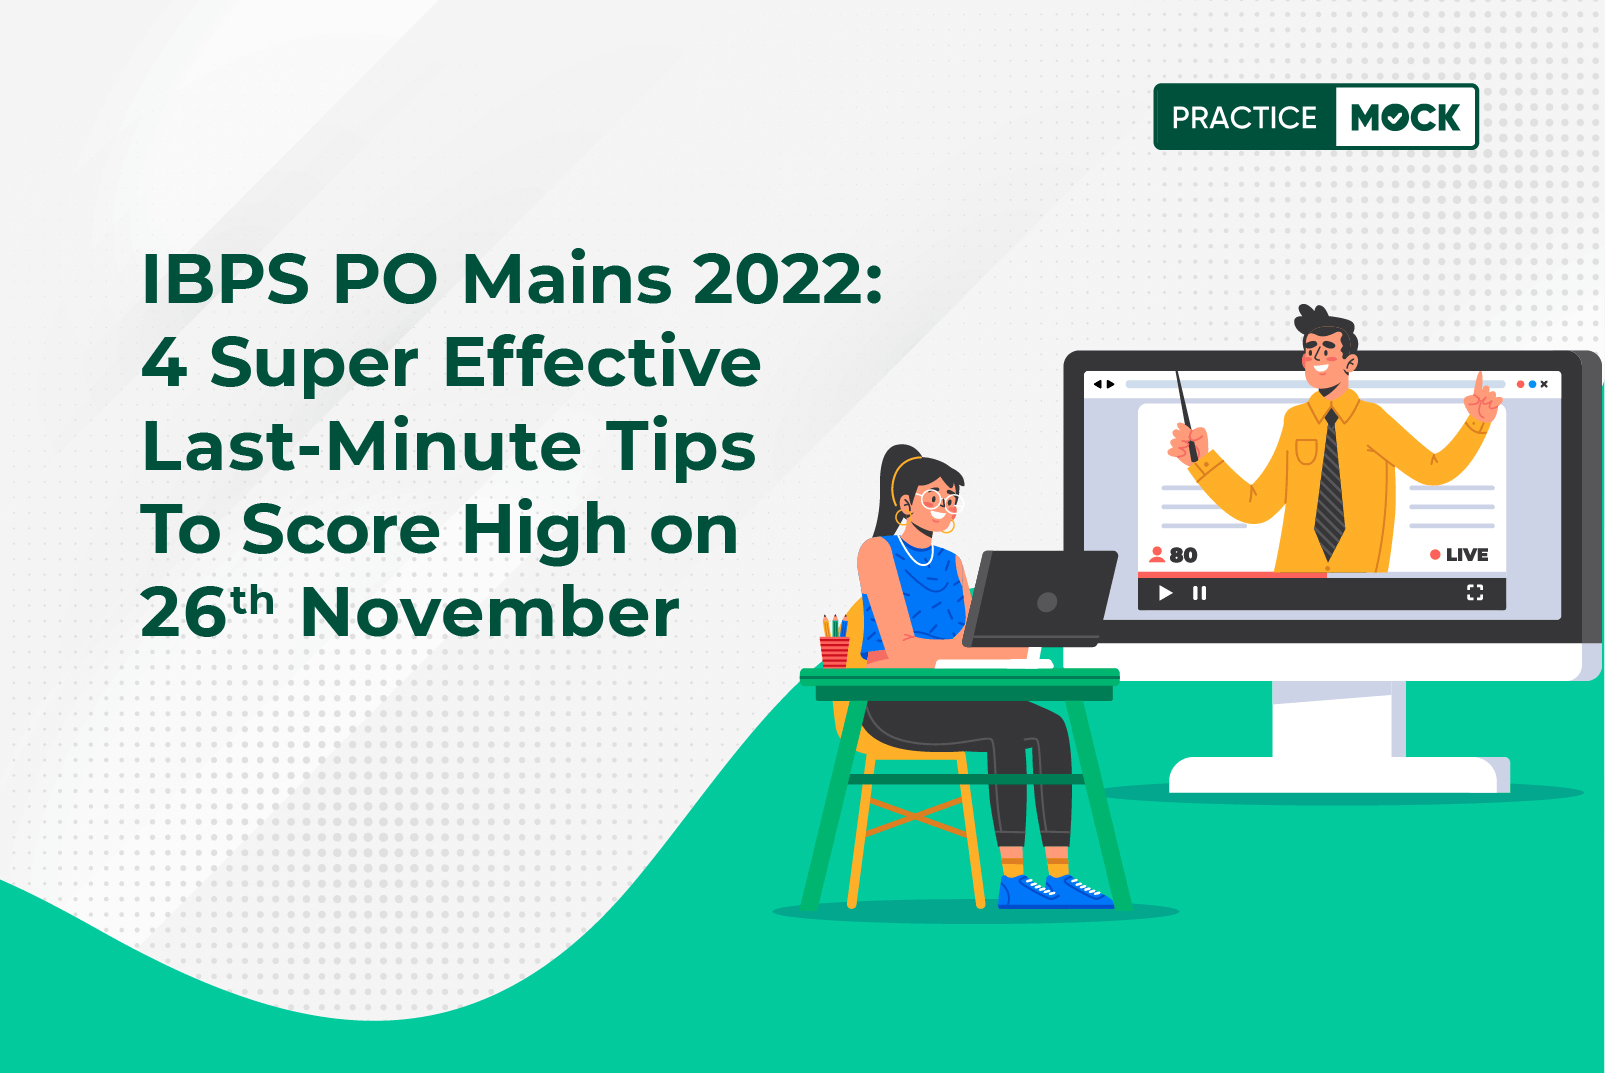 IBPS PO Mains 2022: Best 4 Last-Minute Tips to Score Full Marks